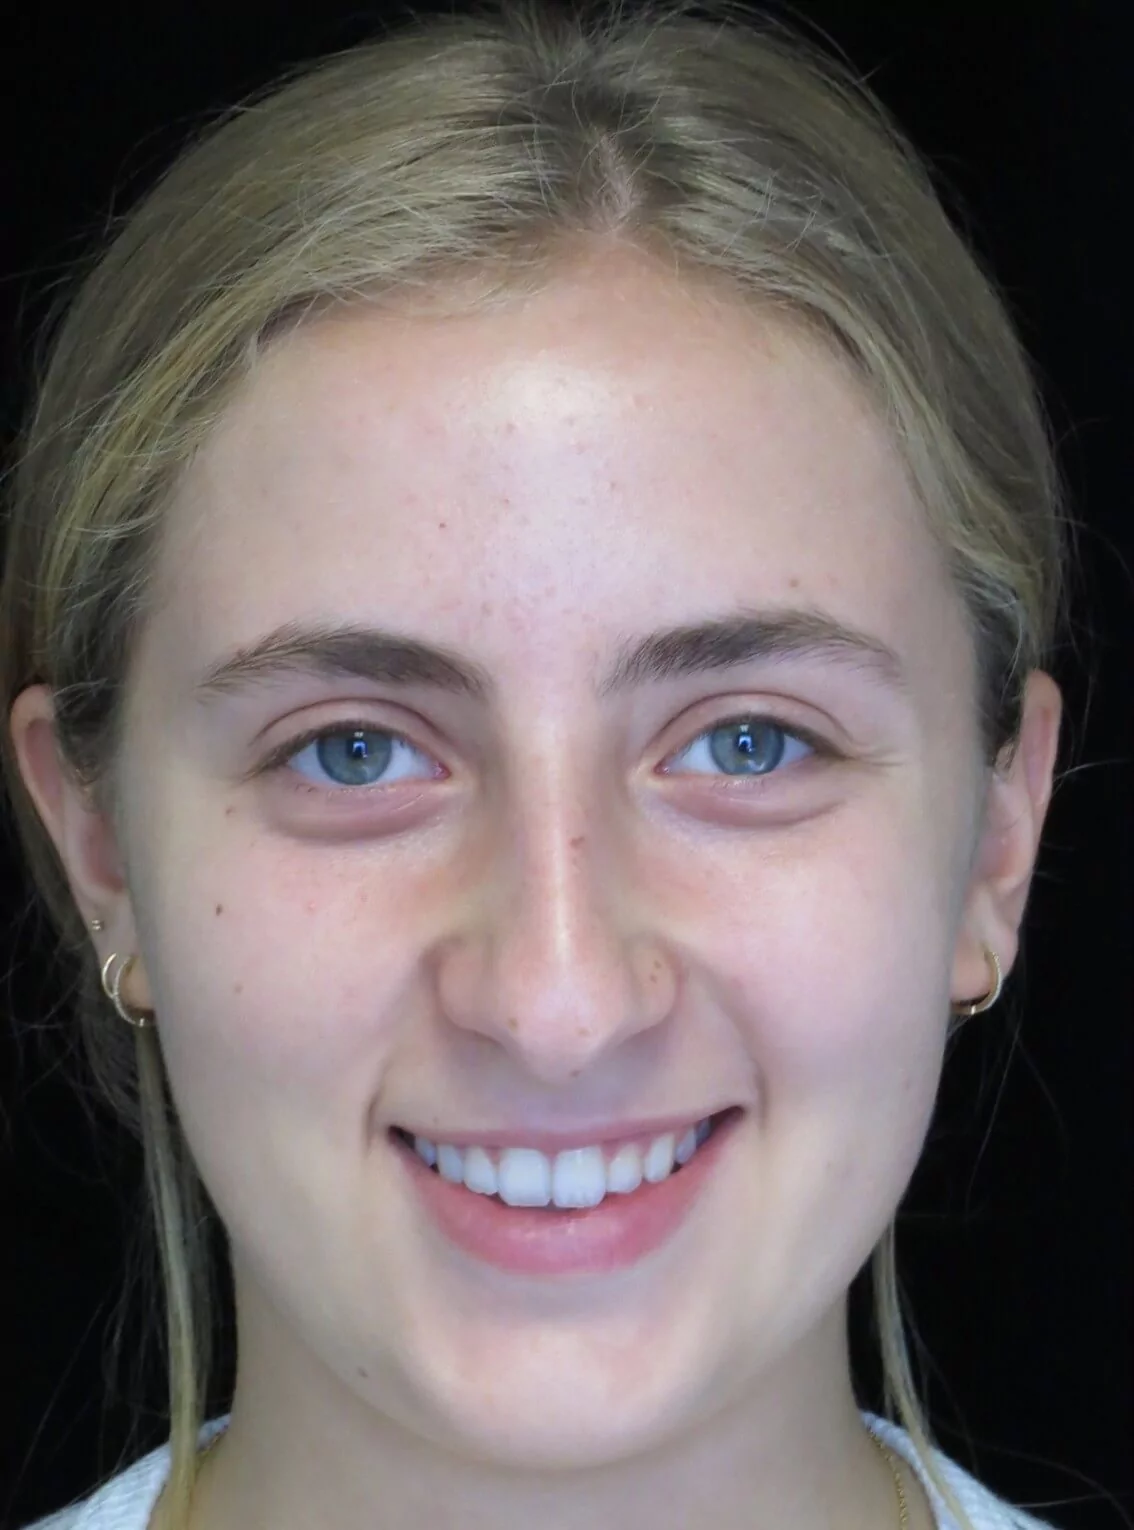 before and after photo on a frontal view of a smiling teenage female patient who underwent scarless rhinoplasty